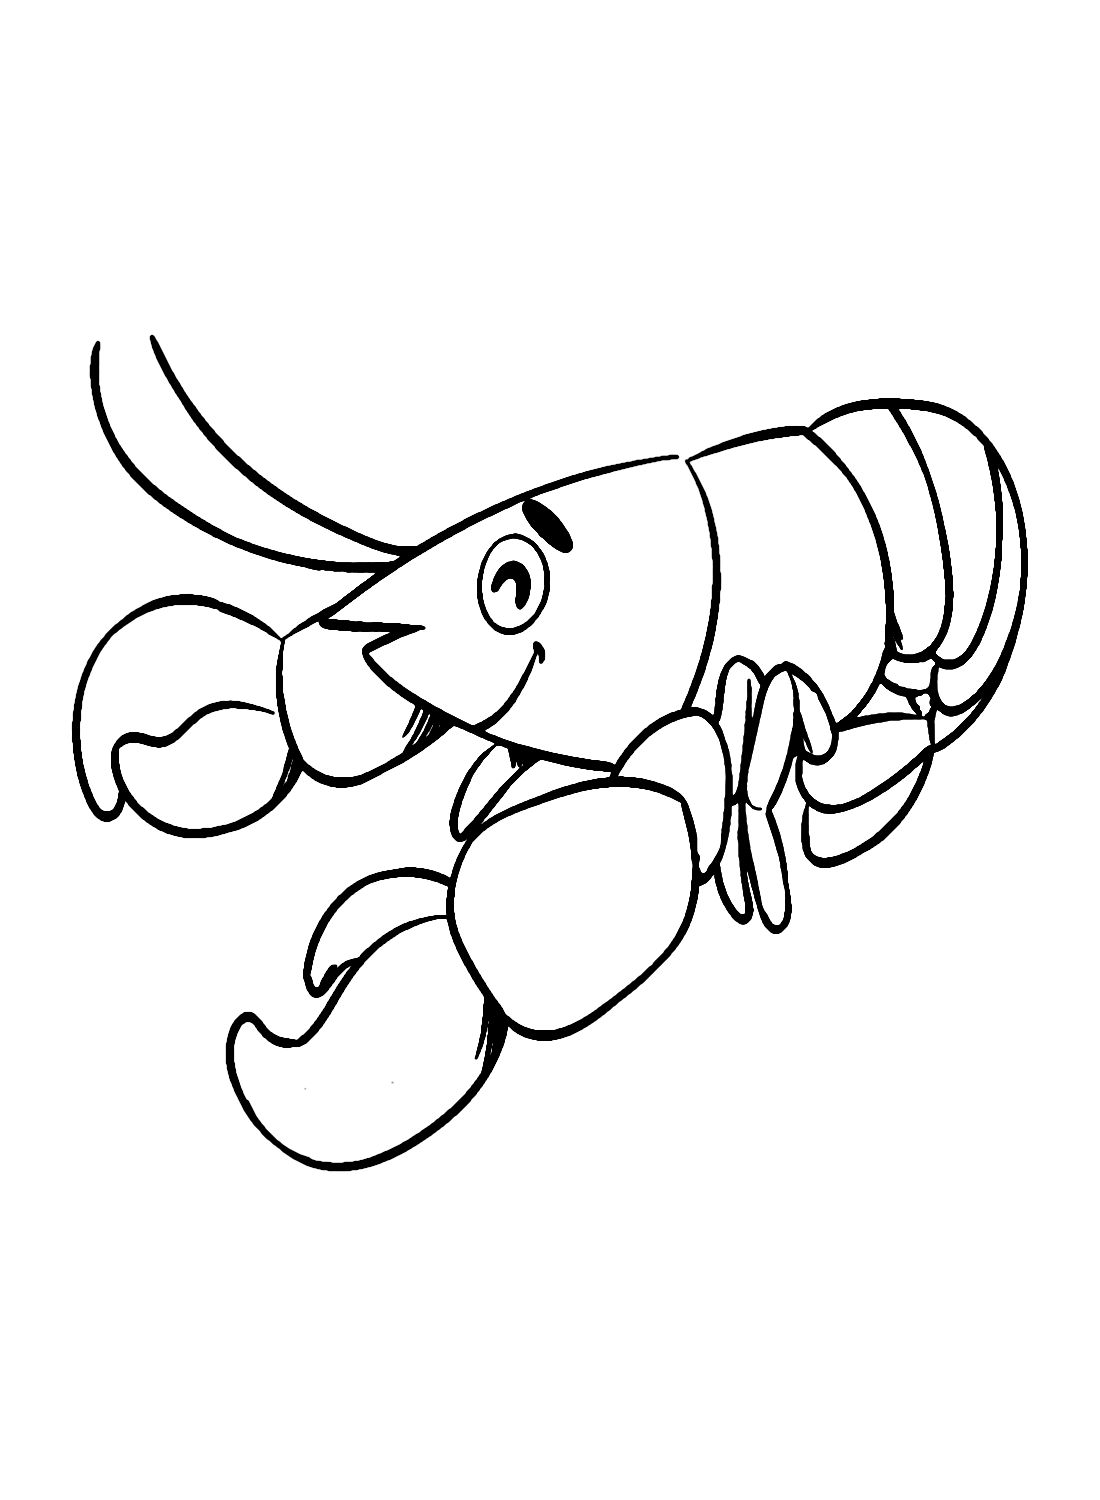 Cute Crawfish Coloring Page